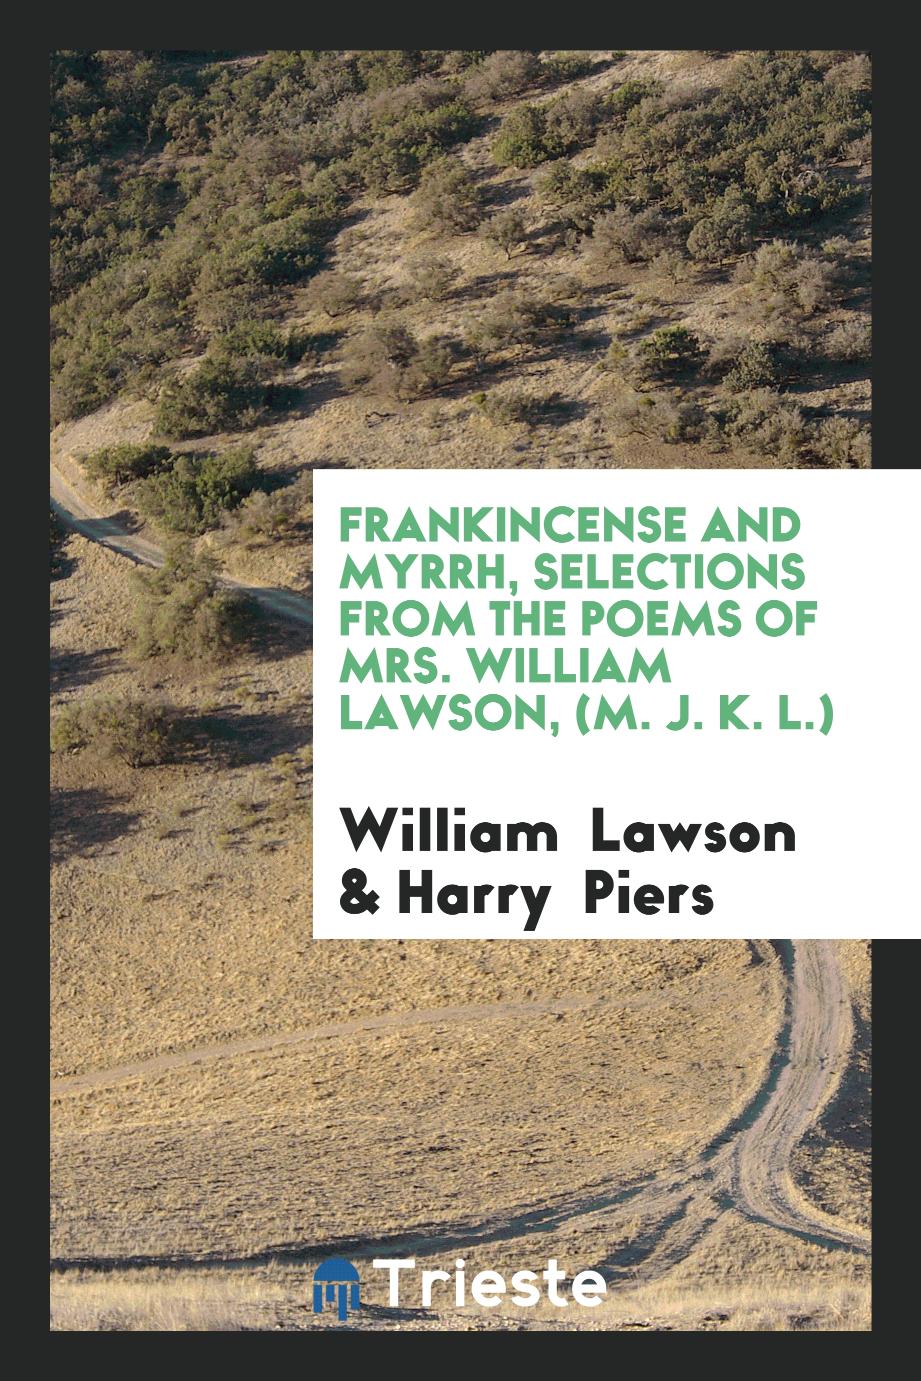 Frankincense and Myrrh, Selections from the Poems of Mrs. William Lawson, (M. J. K. L.)